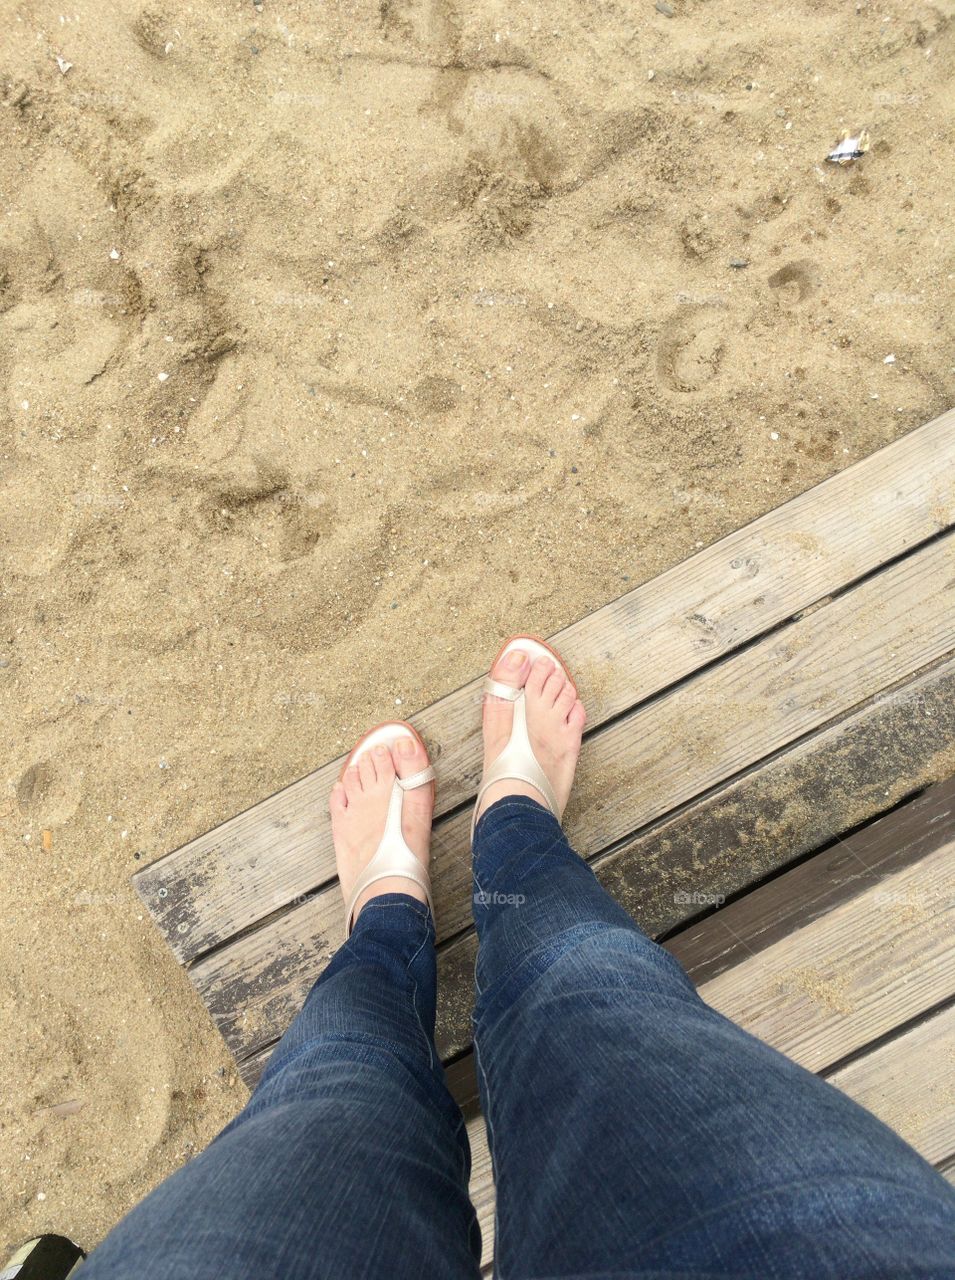 Go down to the beach. I am on the step.

